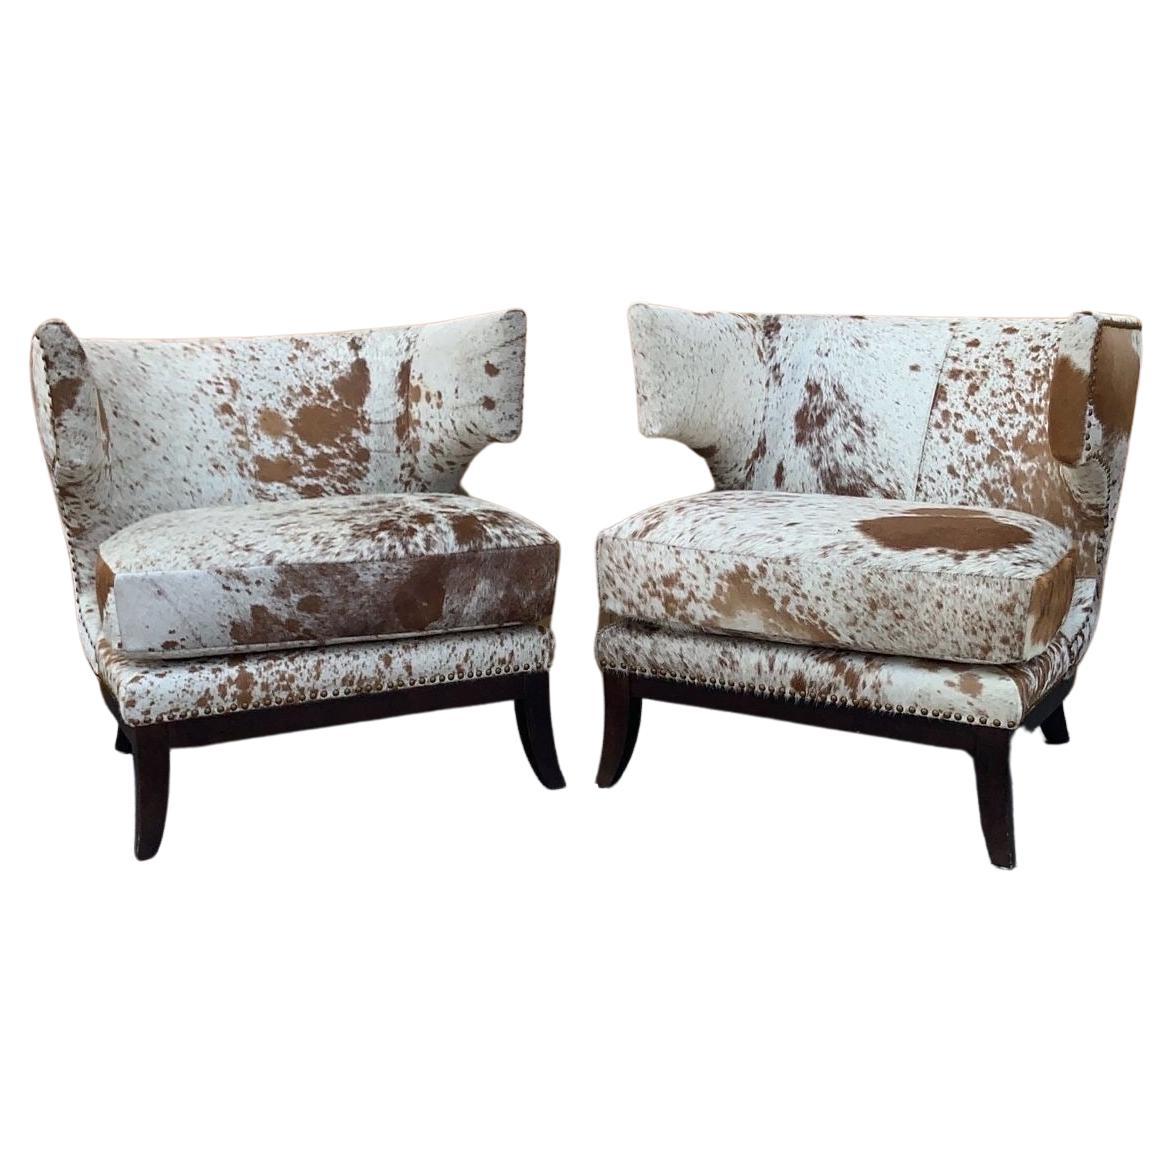 English Horseshoe Savoy Chairs Newly Upholstered in Brazilian Cowhide - Set of 2